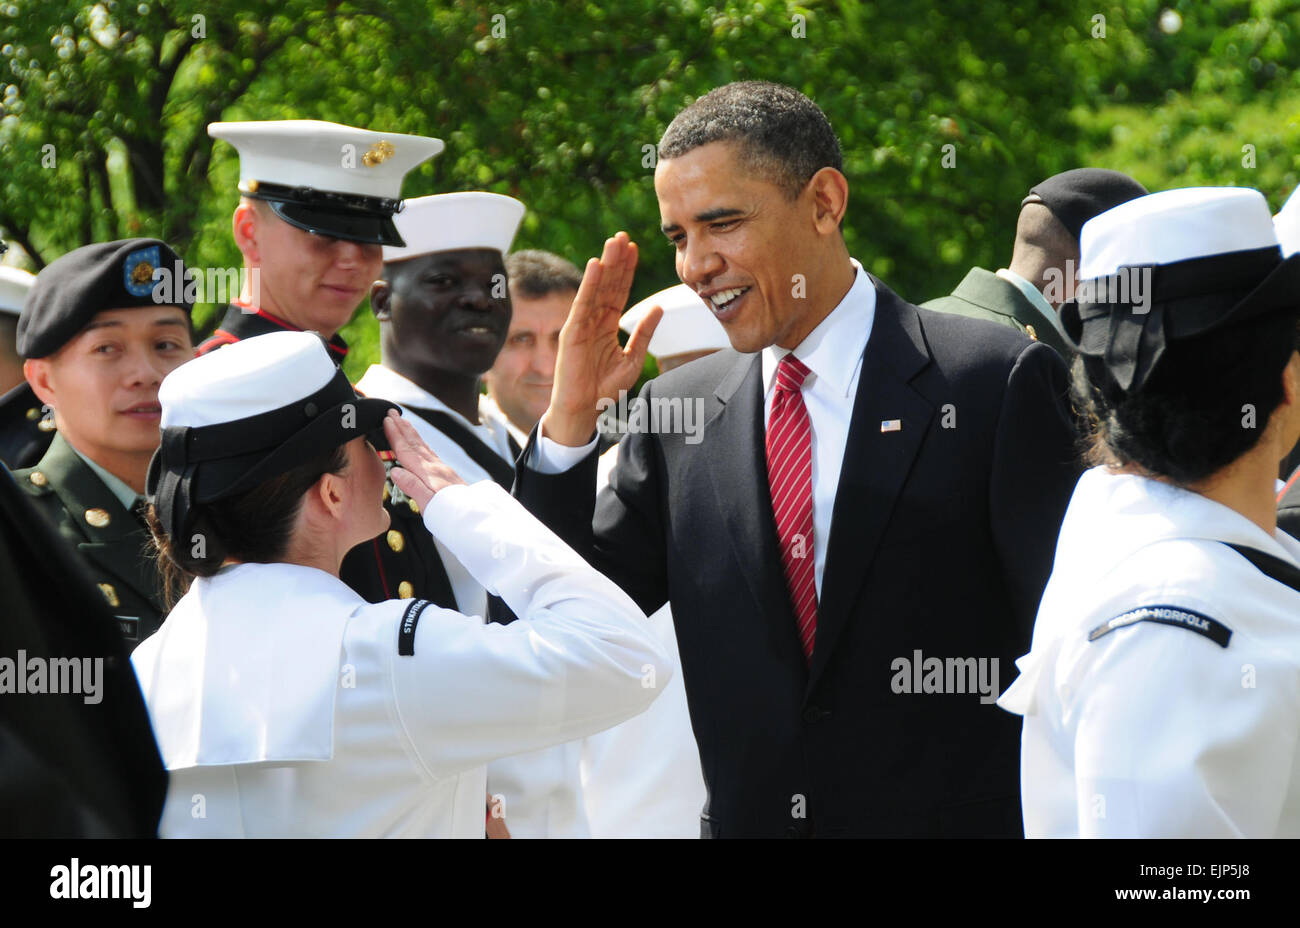 President Barack Obama salutes a Sailor following naturalization ceremony, April 23, at the White House. During the ceremony, 24 U.S. servicemembers took the oath of allegiance to the United States, becoming American citizens in the process.         Servicemembers become U.S. citizens at White House  /-news/2010/04/25/37952-servicemembers-become-us-citizens-at-white-house/index.html Stock Photo